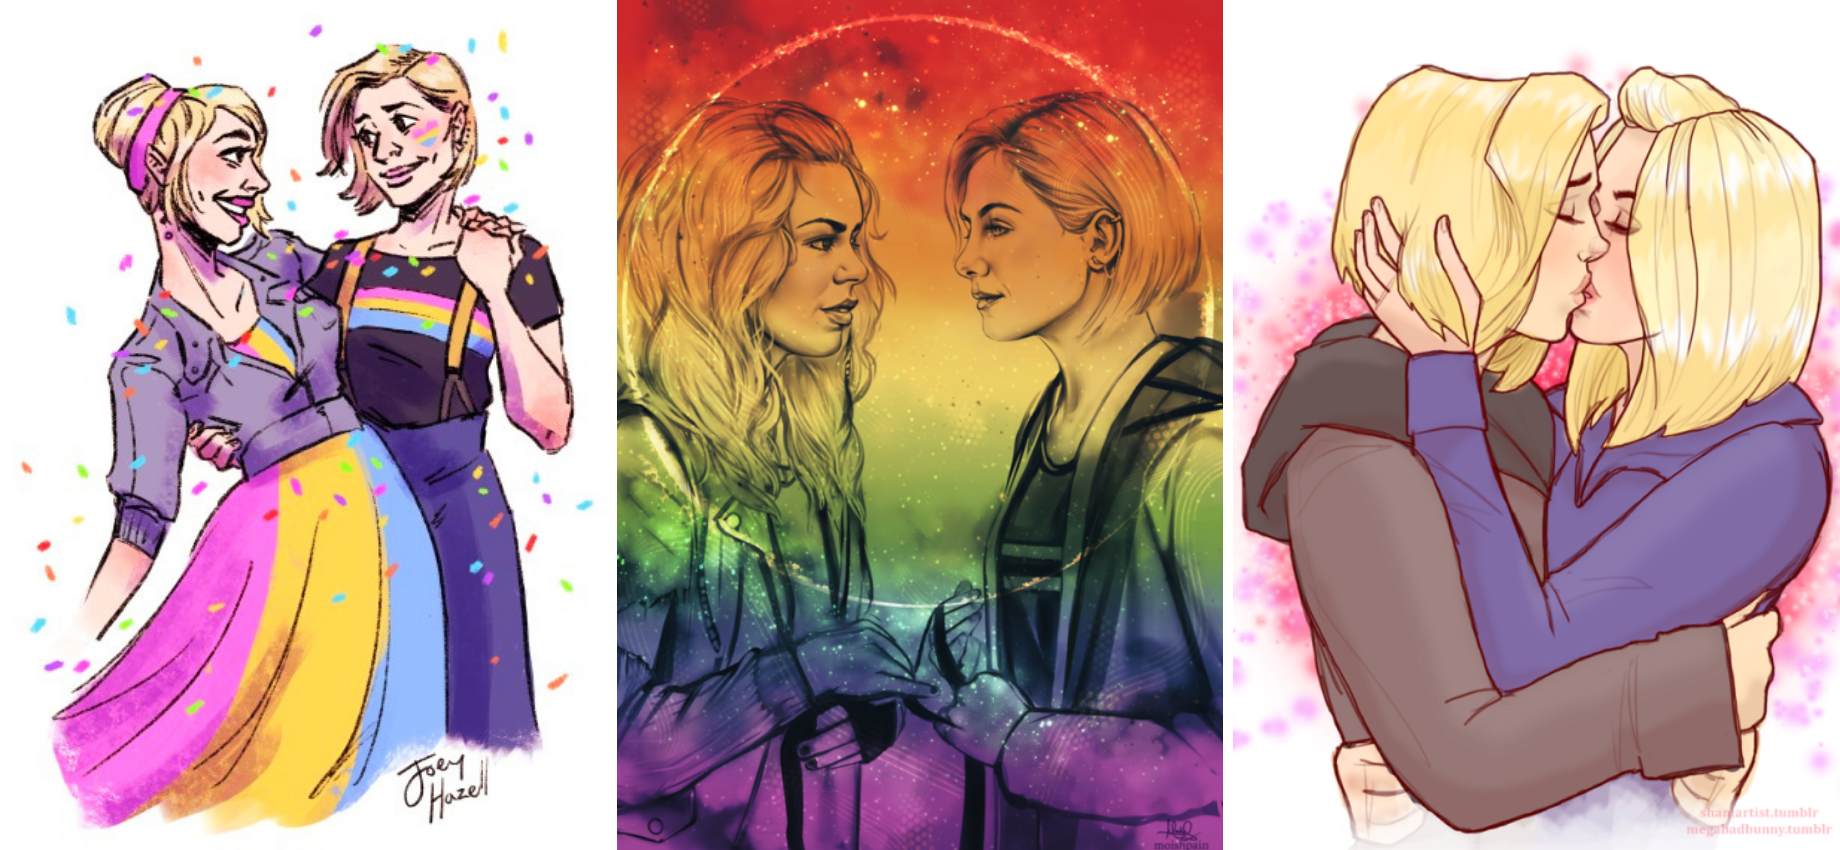 'Doctor Who': 22 The Doctor and Rose Tyler Fanart Pieces That Made Us Swoon